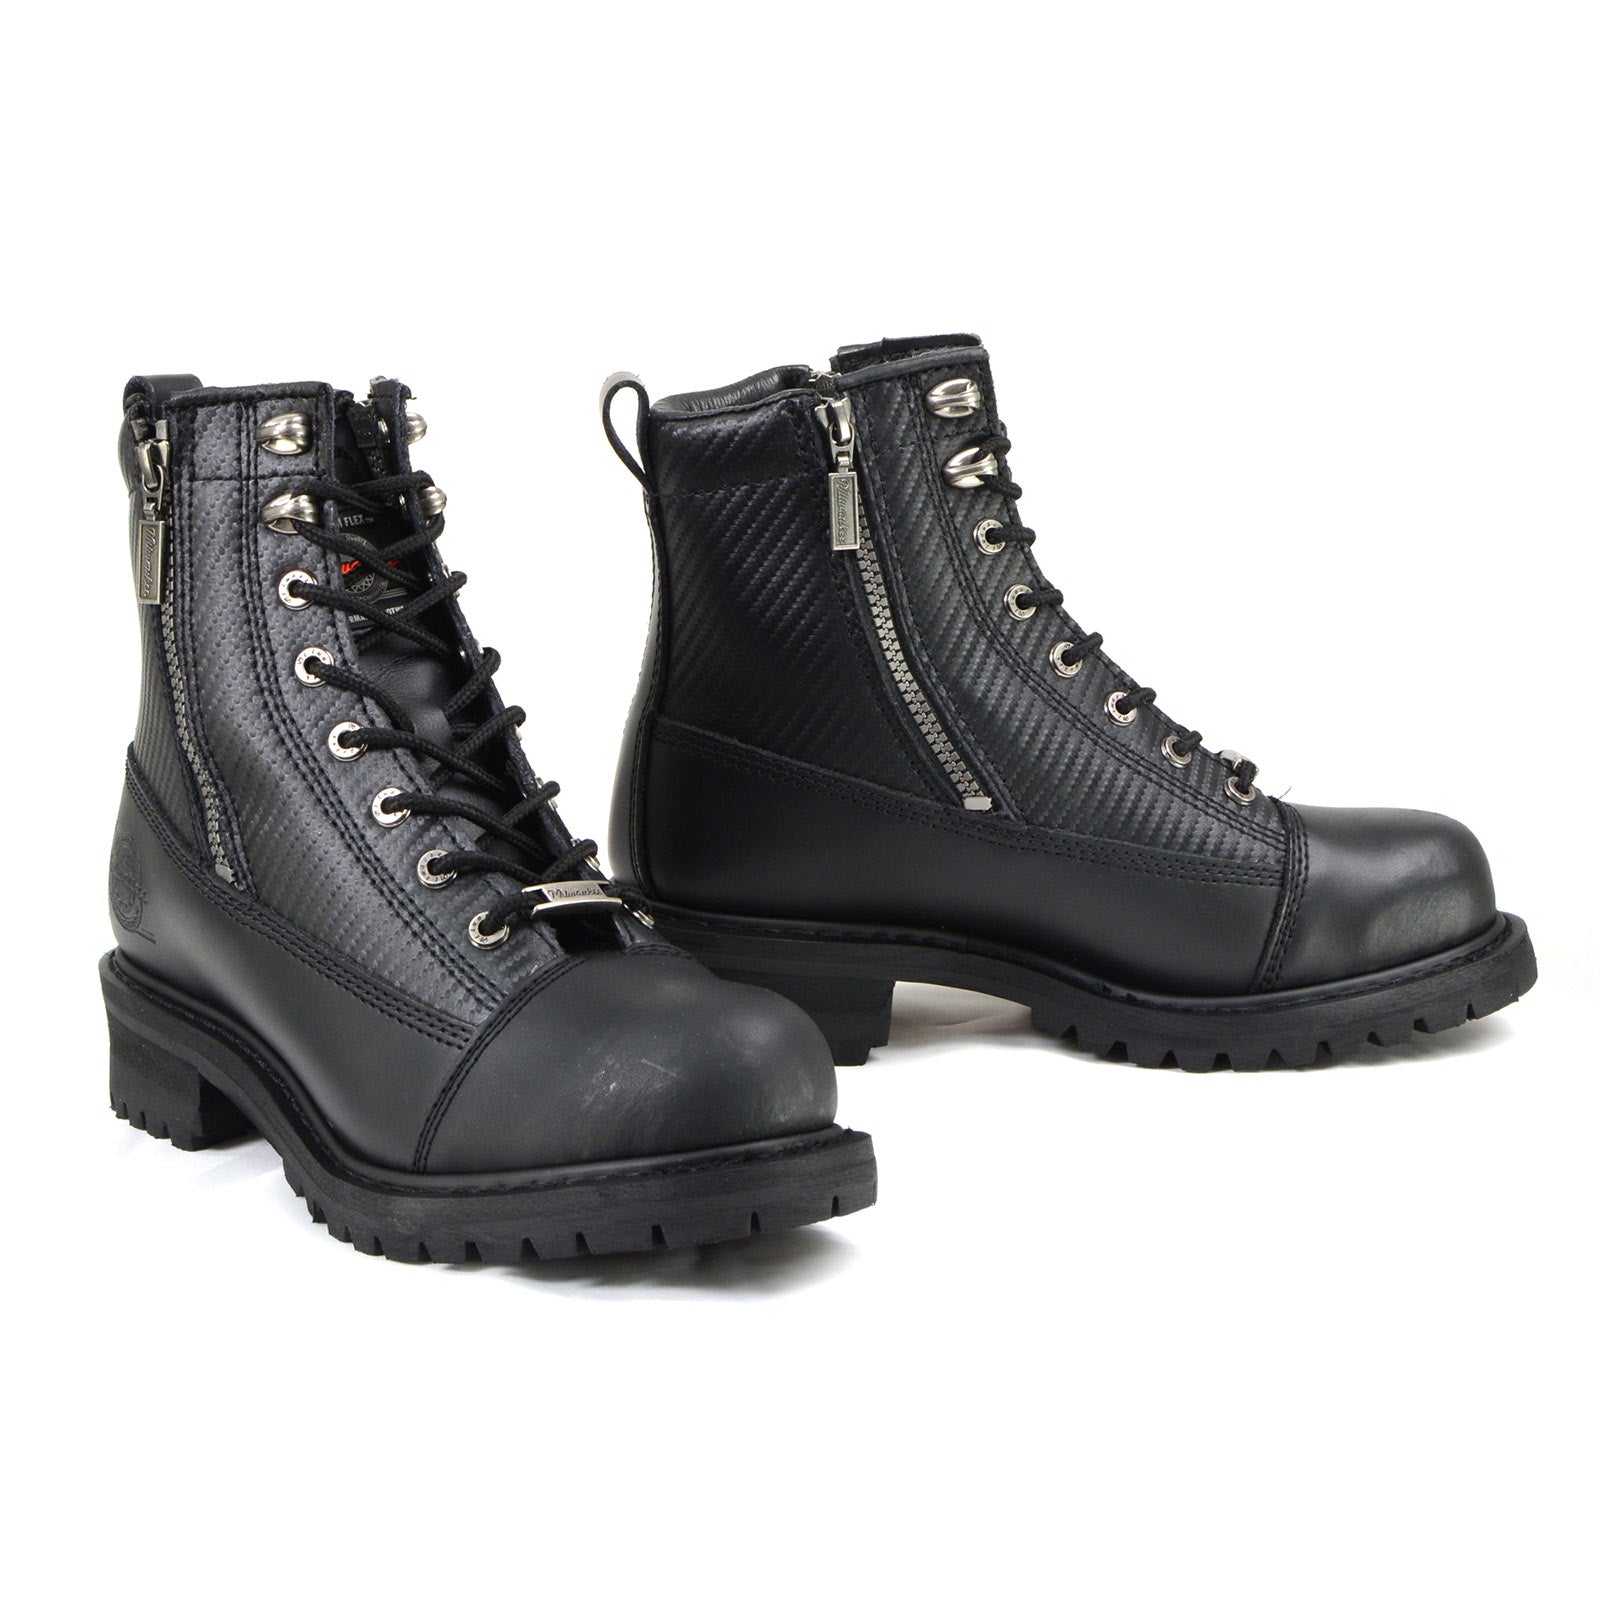 Milwaukee Motorcycle Clothing Company MB408EEE Men's EEE Wide Black Accelerator Motorcycle Leather Boots